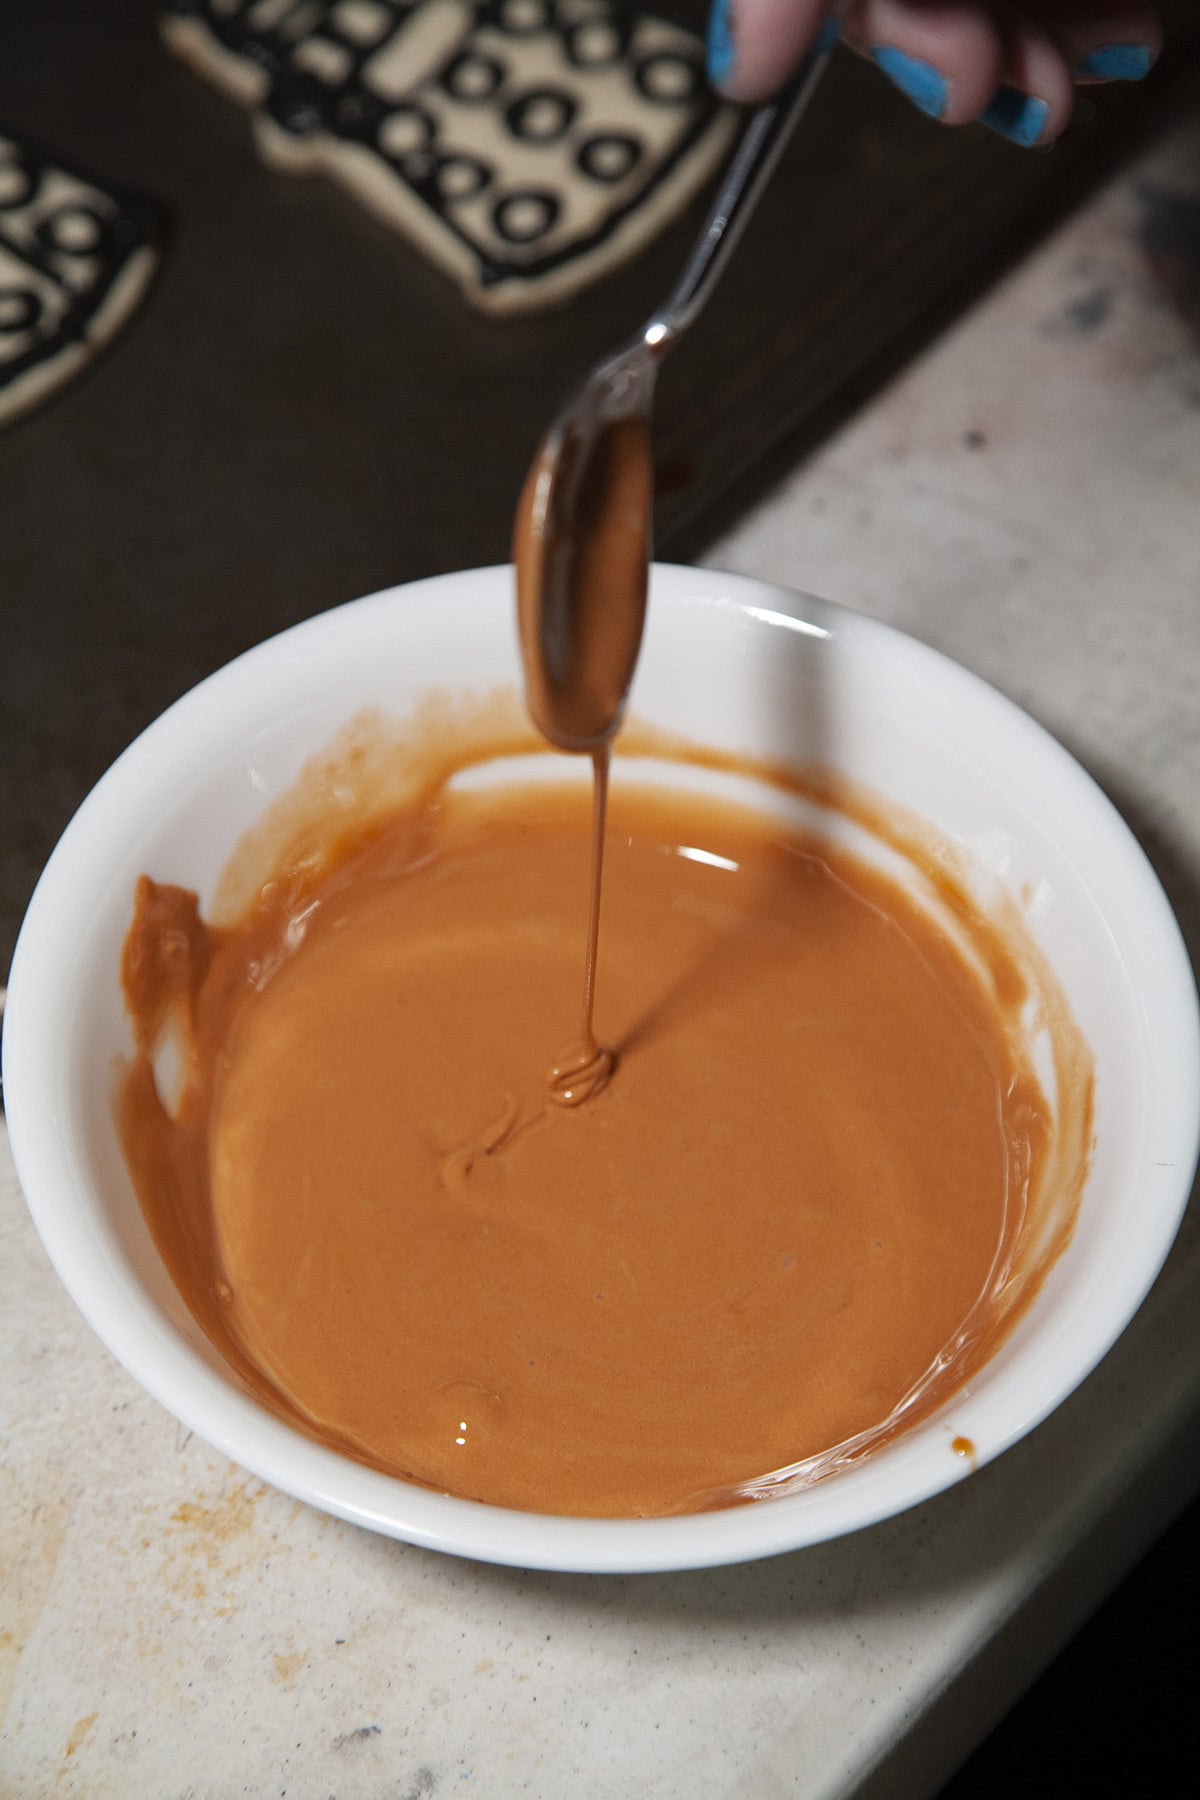 A bowl of brown icing. A spoon drizzles some of it back into the bowl.